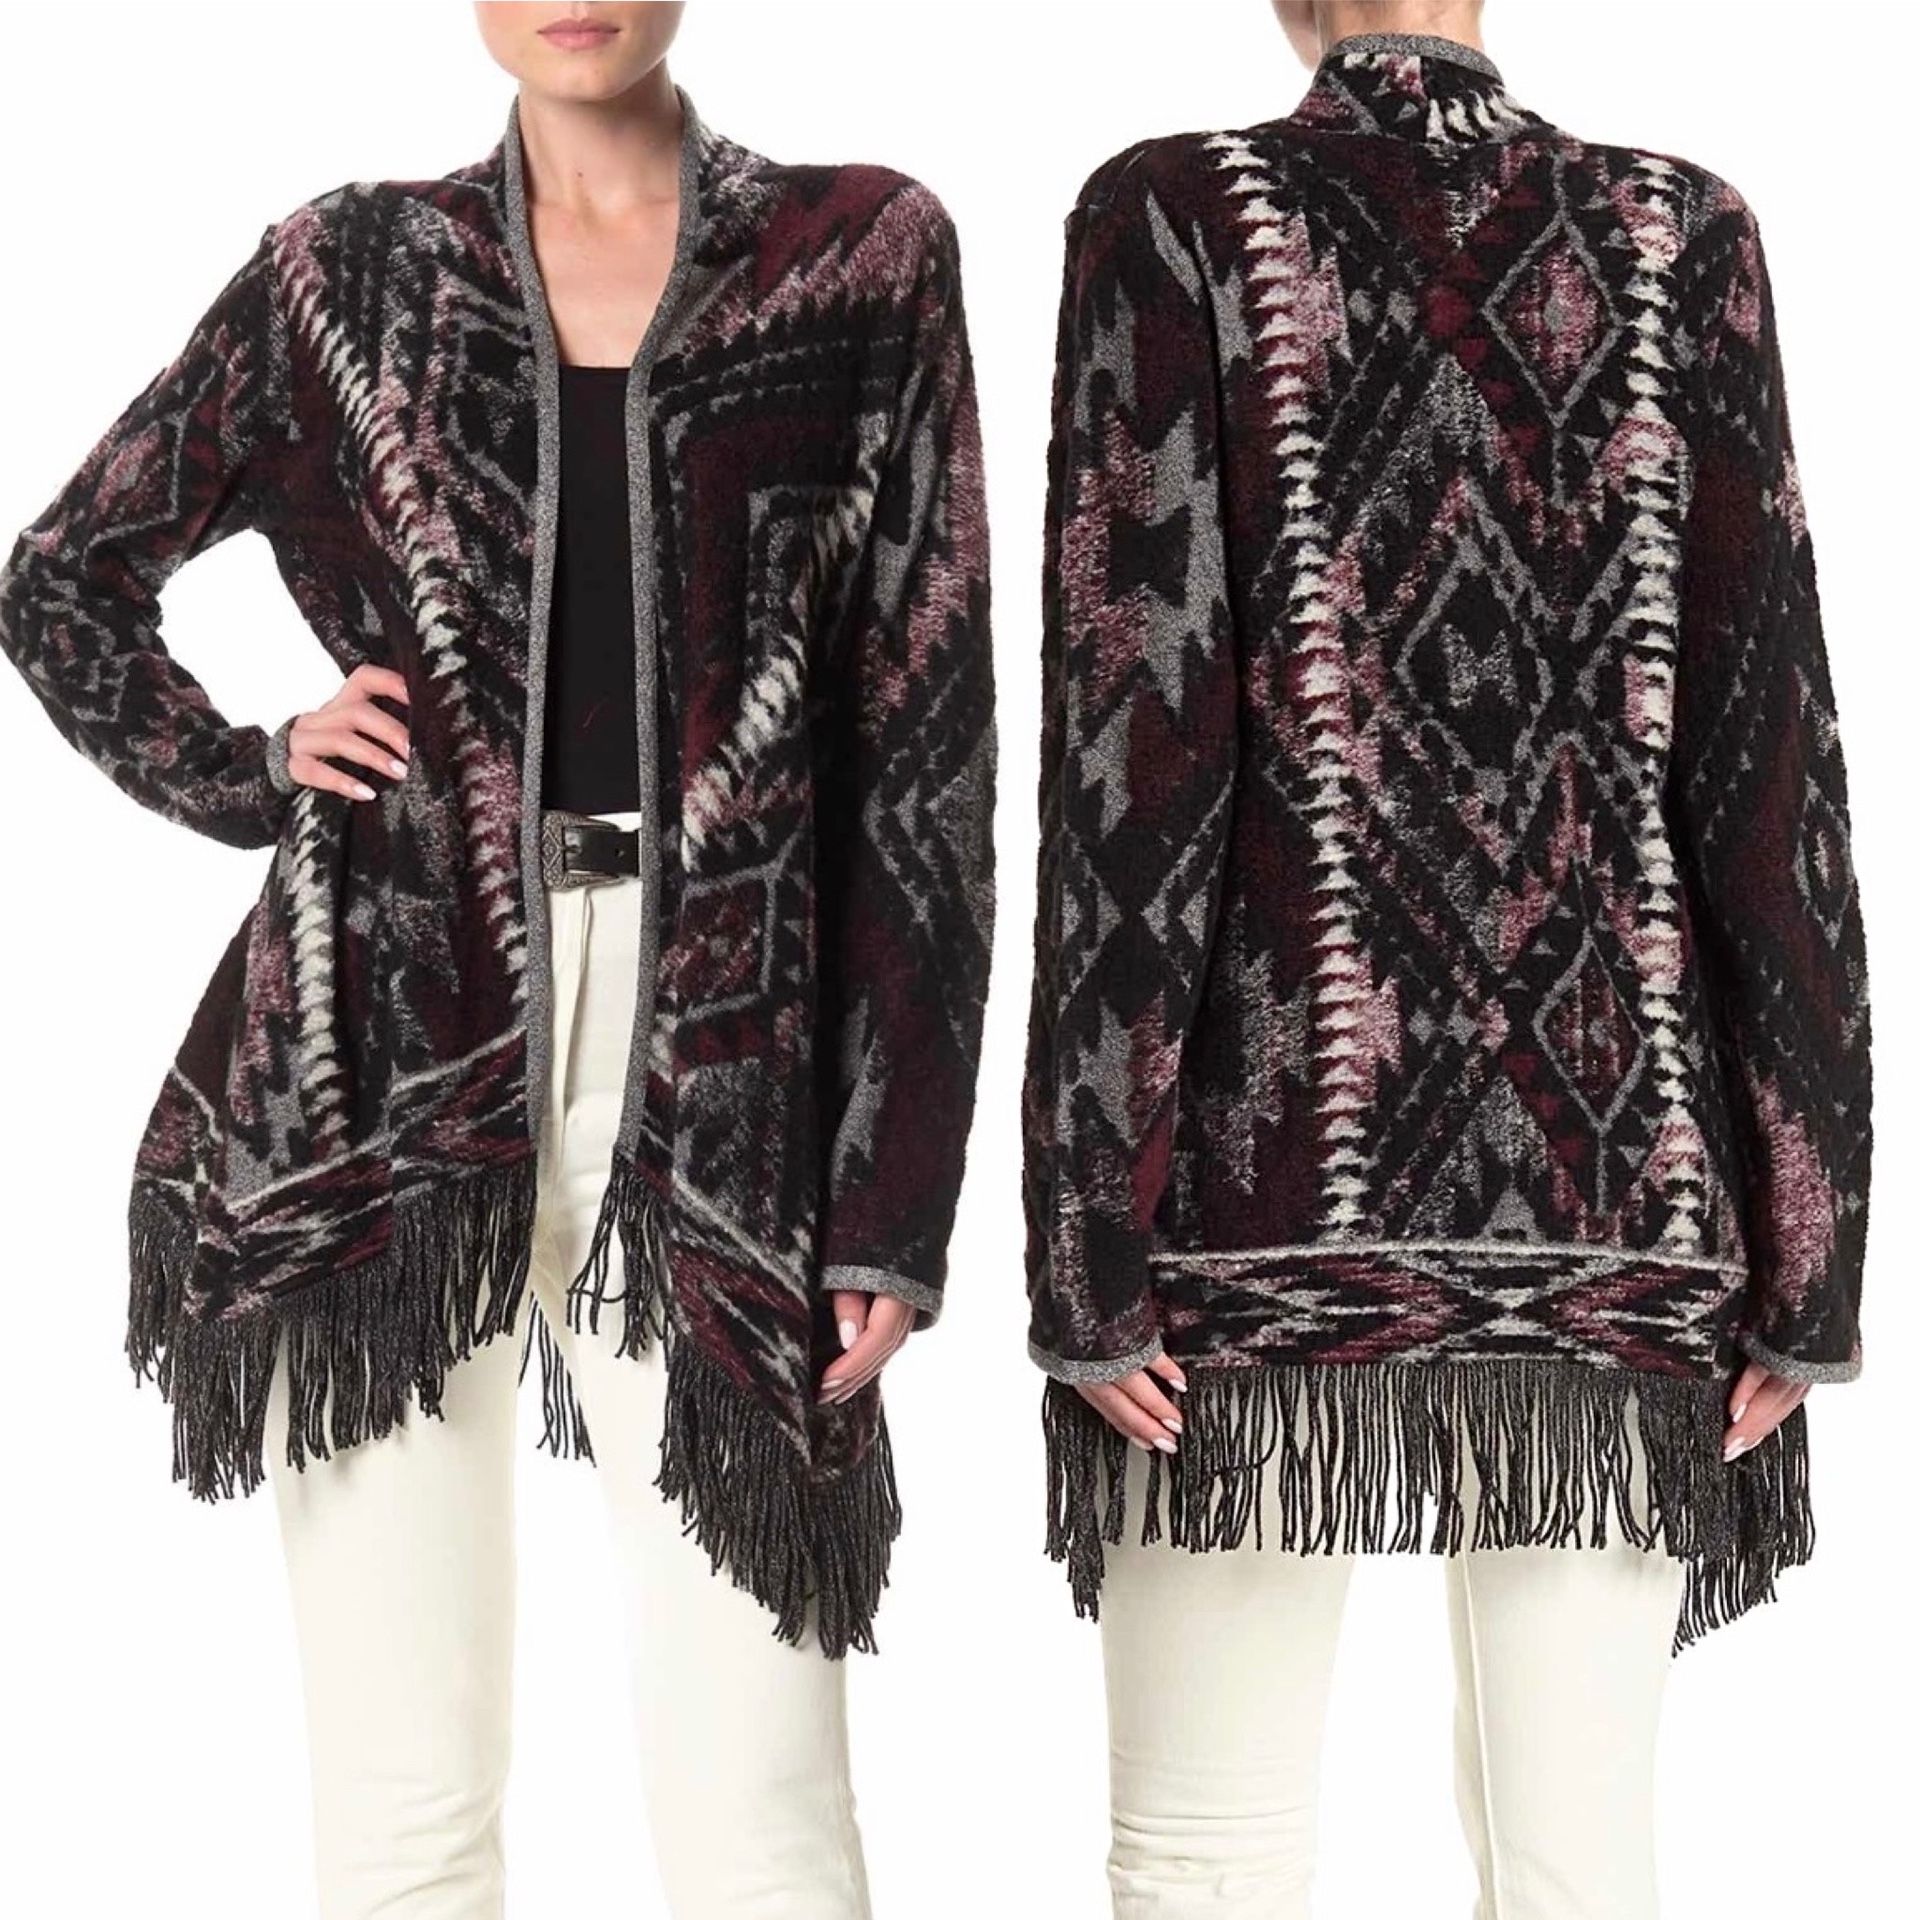 ✨New LUCKY BRAND Fringed Brushed Knit Cardigan Black Multi Womens Size Small SP